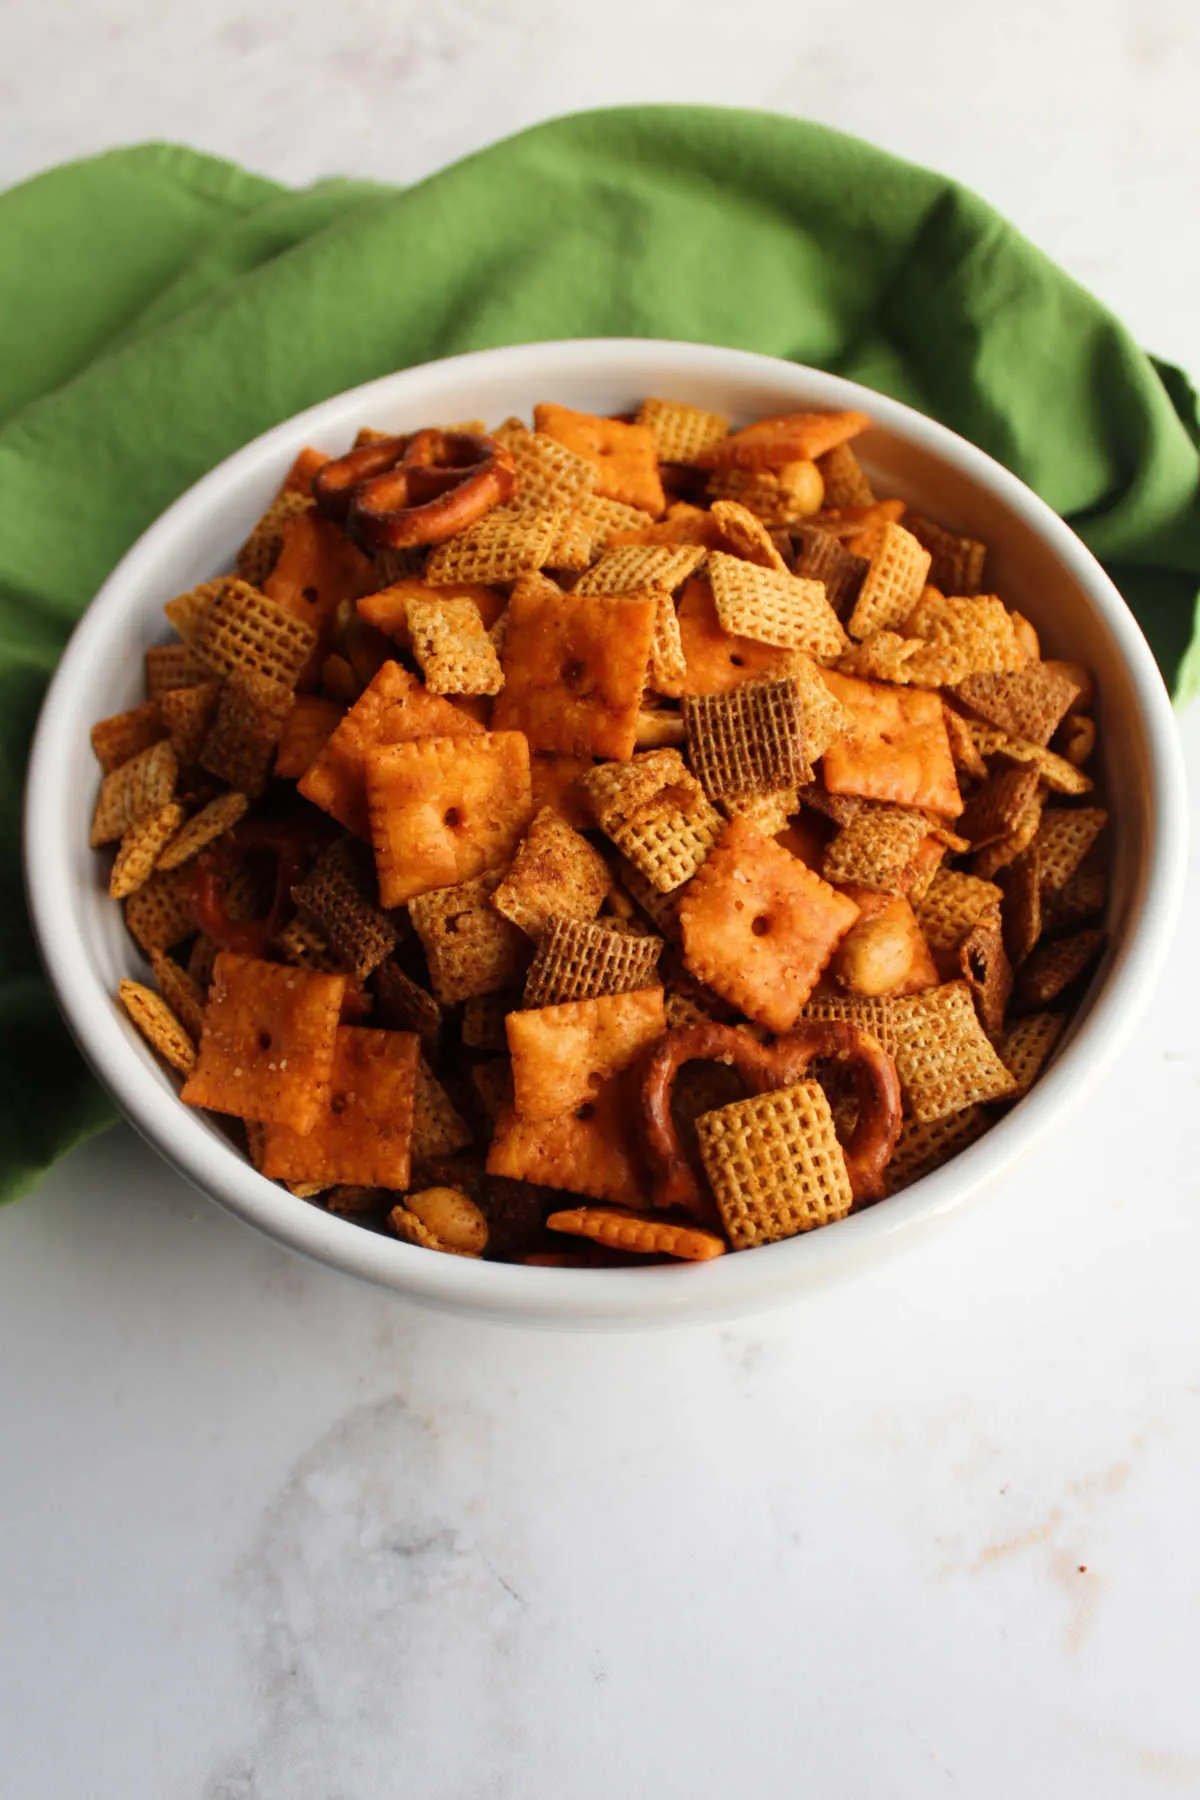 Bowl of chex mix made with taco seasoning, cheese crackers etc. ready to eat.